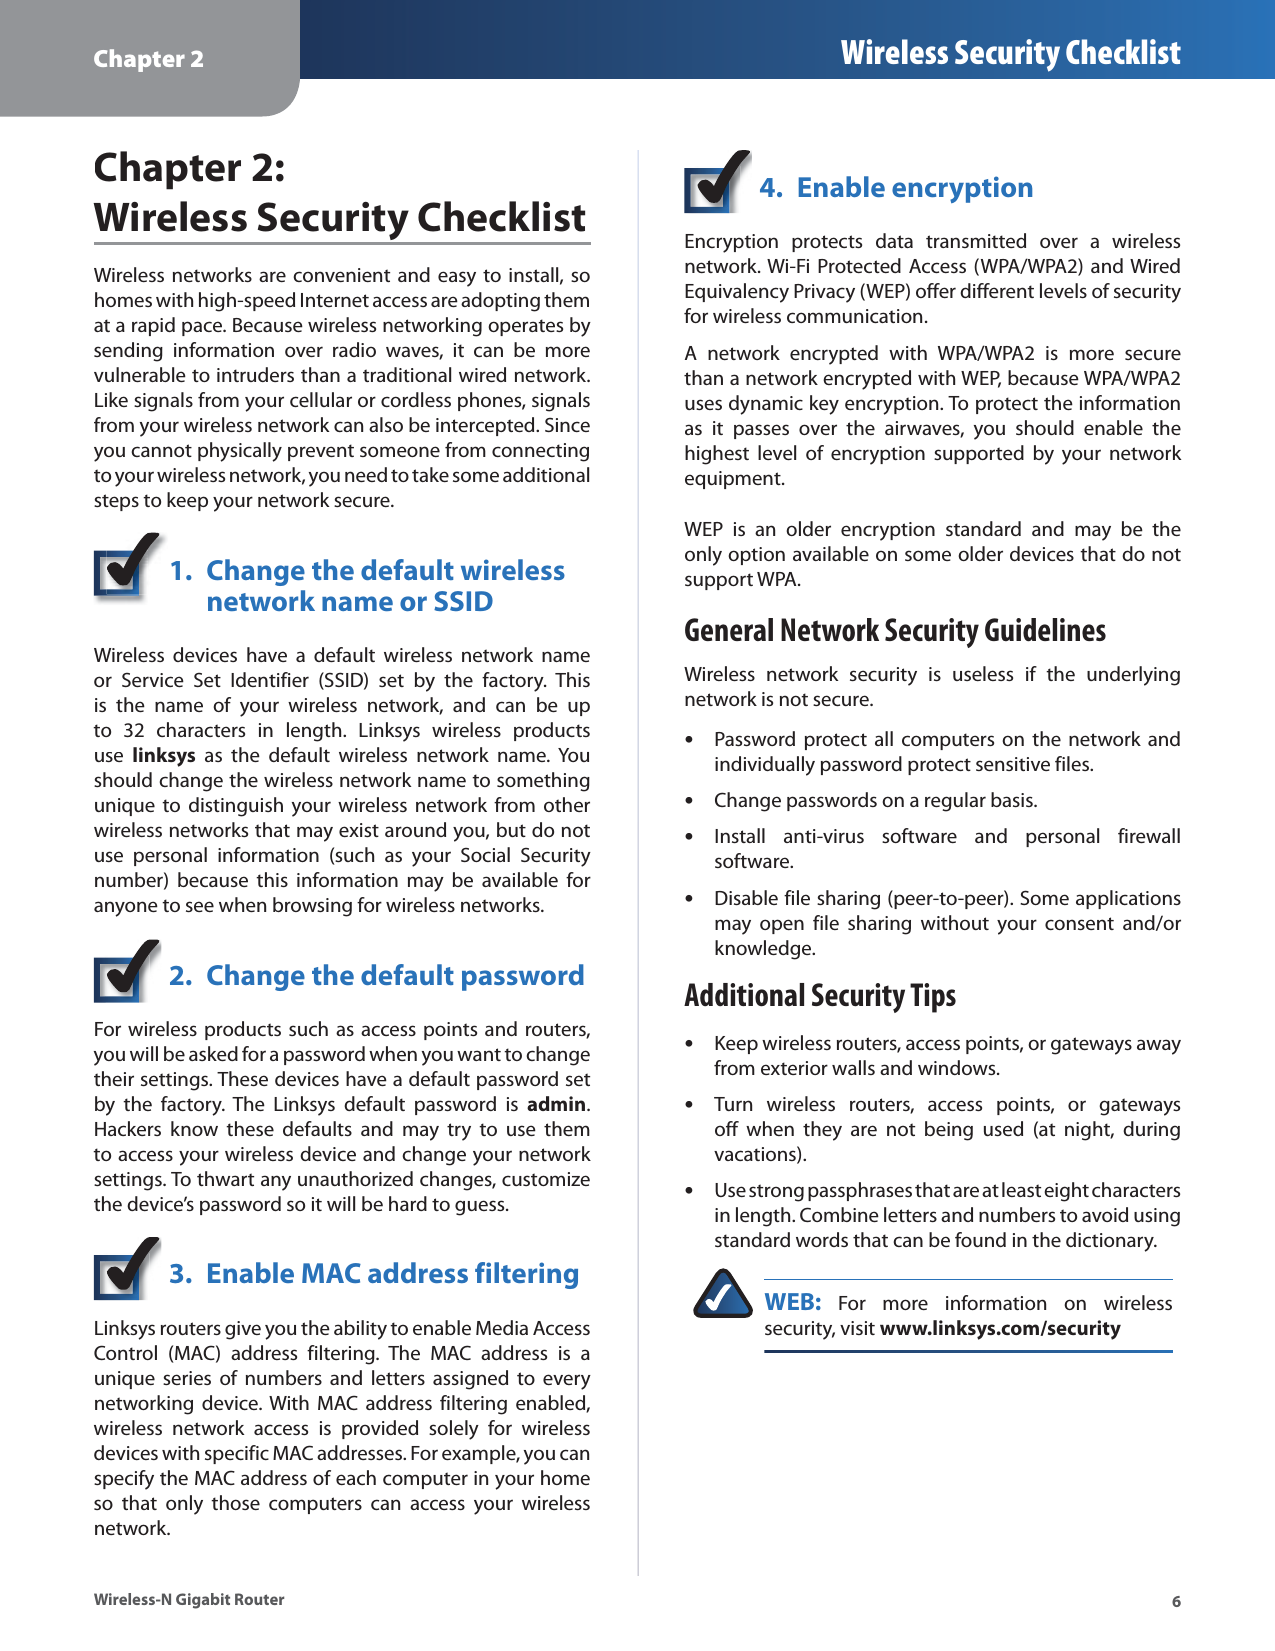 Chapter 2 Wireless Security Checklist6Wireless-N Gigabit RouterChapter 2:  Wireless Security ChecklistWireless networks are convenient and easy to install, sohomes with high-speed Internet access are adopting themat a rapid pace. Because wireless networking operates bysending information over radio waves, it can be morevulnerable to intruders than a traditional wired network.Like signals from your cellular or cordless phones, signalsfrom your wireless network can also be intercepted. Sinceyou cannot physically prevent someone from connectingto your wireless network, you need to take some additionalsteps to keep your network secure.1. Change the default wireless network name or SSIDWireless devices have a default wireless network nameor Service Set Identifier (SSID) set by the factory. Thisis the name of your wireless network, and can be upto 32 characters in length. Linksys wireless productsuselinksys as the default wireless network name. Youshould change the wireless network name to somethingunique to distinguish your wireless network from otherwireless networks that may exist around you, but do notuse personal information (such as your Social Securitynumber) because this information may be available foranyone to see when browsing for wireless networks.2. Change the default passwordFor wireless products such as access points and routers,you will be asked for a password when you want to changetheir settings. These devices have a default password setby the factory. The Linksys default password is admin.Hackers know these defaults and may try to use themto access your wireless device and change your network settings. To thwart any unauthorized changes, customizethe device’s password so it will be hard to guess.3. Enable MAC address filteringLinksys routers give you the ability to enable Media AccessControl (MAC) address filtering. The MAC address is aunique series of numbers and letters assigned to everynetworking device. With MAC address filtering enabled,wireless network access is provided solely for wirelessdevices with specific MAC addresses. For example, you canspecify the MAC address of each computer in your homeso that only those computers can access your wirelessnetwork.4. Enable encryptionEncryption protects data transmitted over a wirelessnetwork. Wi-Fi Protected Access (WPA/WPA2) and WiredEquivalency Privacy (WEP) offer different levels of securityfor wireless communication.A network encrypted with WPA/WPA2 is more securethan a network encrypted with WEP, because WPA/WPA2uses dynamic key encryption. To protect the informationas it passes over the airwaves, you should enable thehighest level of encryption supported by your network equipment. WEP is an older encryption standard and may be theonly option available on some older devices that do notsupport WPA.General Network Security GuidelinesWireless network security is useless if the underlyingnetwork is not secure.Password protect all computers on the network andsindividually password protect sensitive files.Change passwords on a regular basis.sInstall anti-virus software and personal firewallssoftware.Disable file sharing (peer-to-peer). Some applicationssmay open file sharing without your consent and/orknowledge.Additional Security TipsKeep wireless routers, access points, or gateways awaysfrom exterior walls and windows.Turn wireless routers, access points, or gatewayssoff when they are not being used (at night, duringvacations).Use strong passphrases that are at least eight characterssin length. Combine letters and numbers to avoid usingstandard words that can be found in the dictionary.WEB: For more information on wirelesssecurity, visit www.linksys.com/security